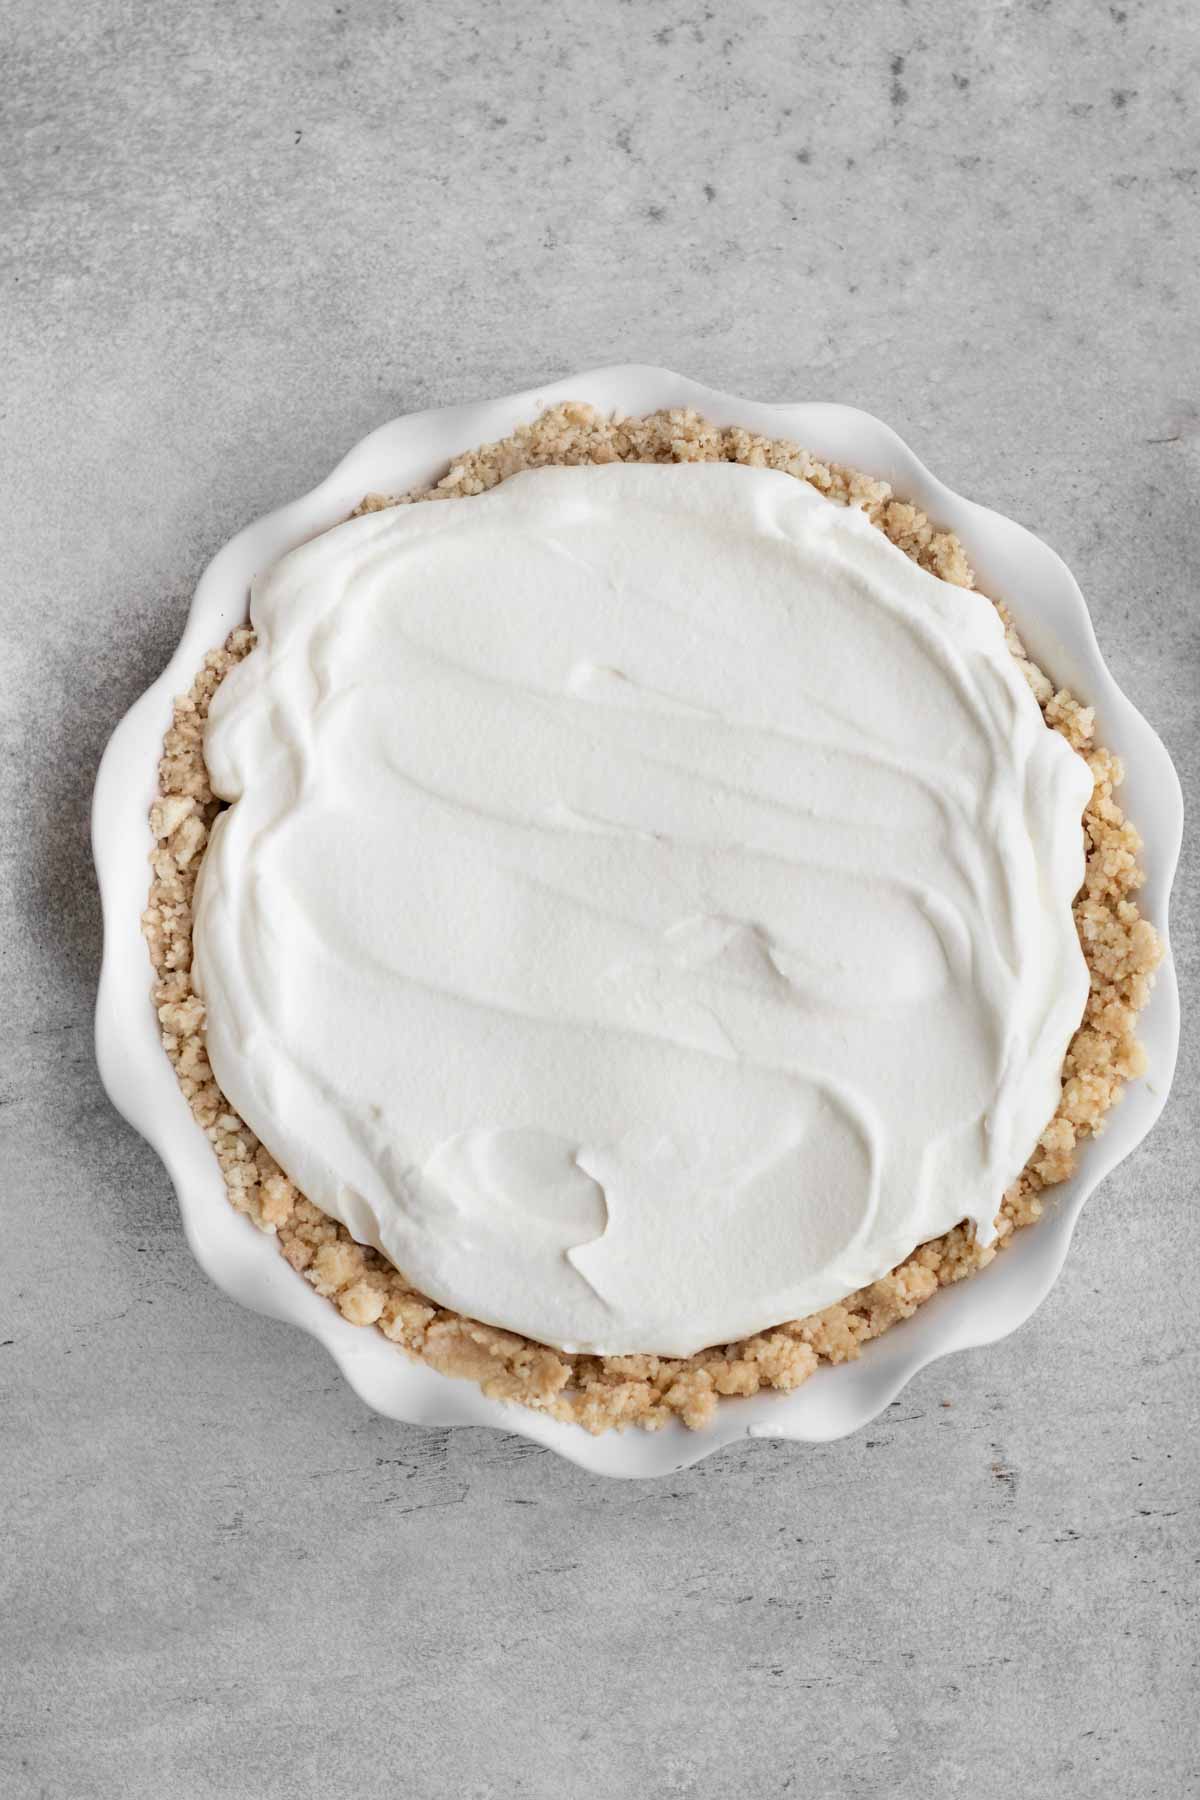 Putting a layer of whipped cream on top of the pie.